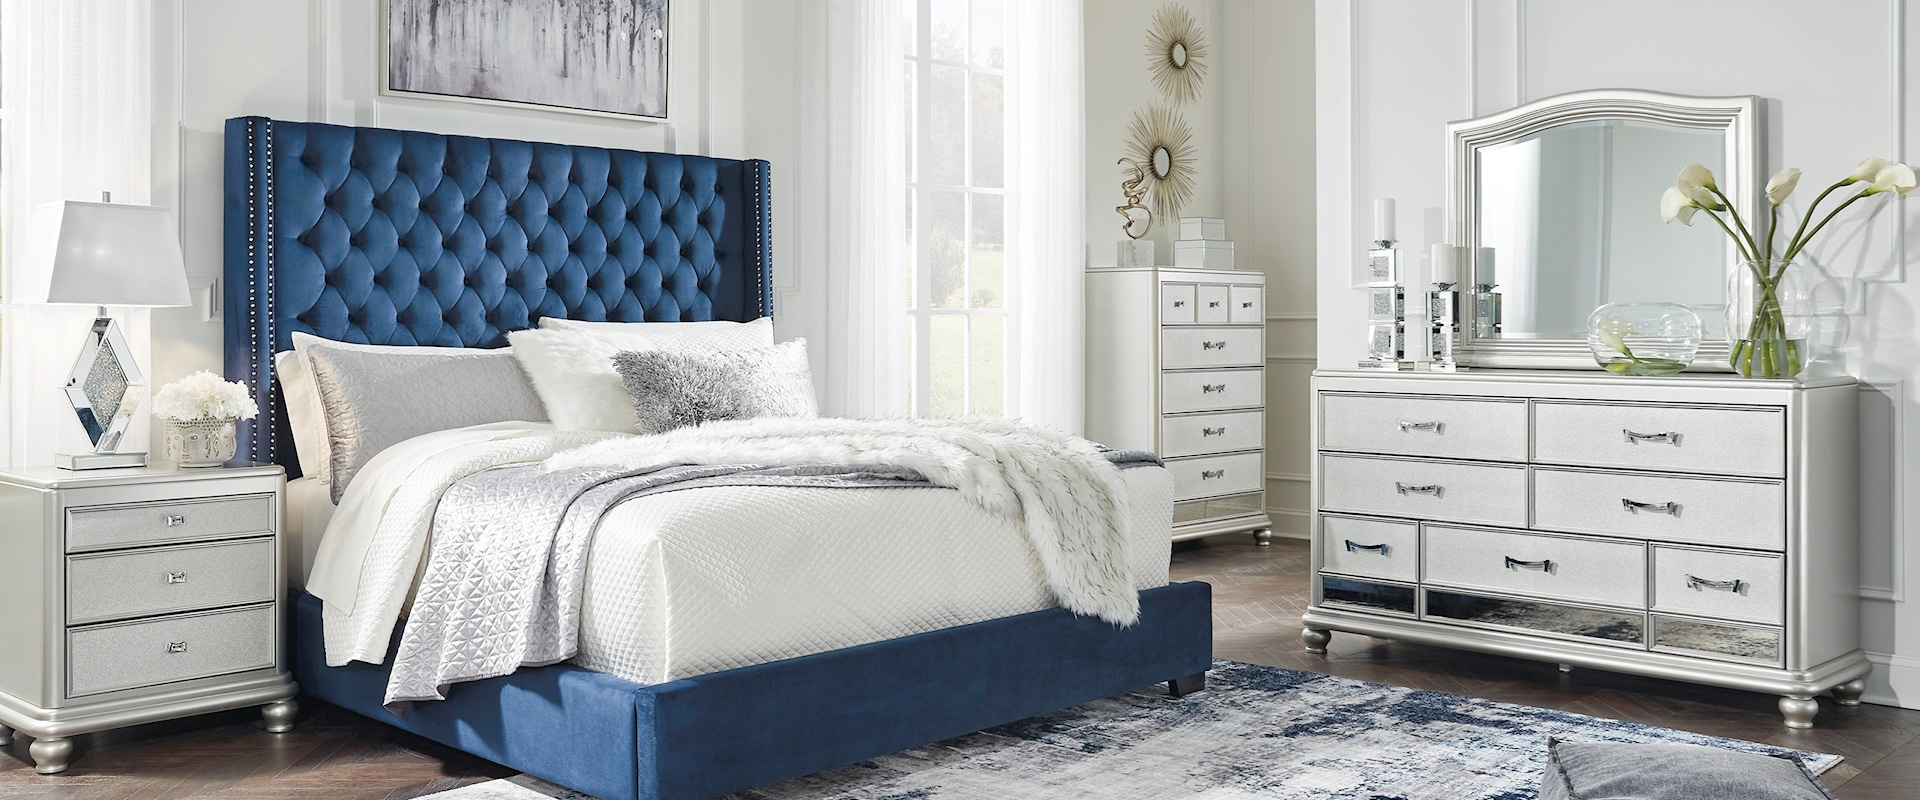 7PC King Bedroom Group